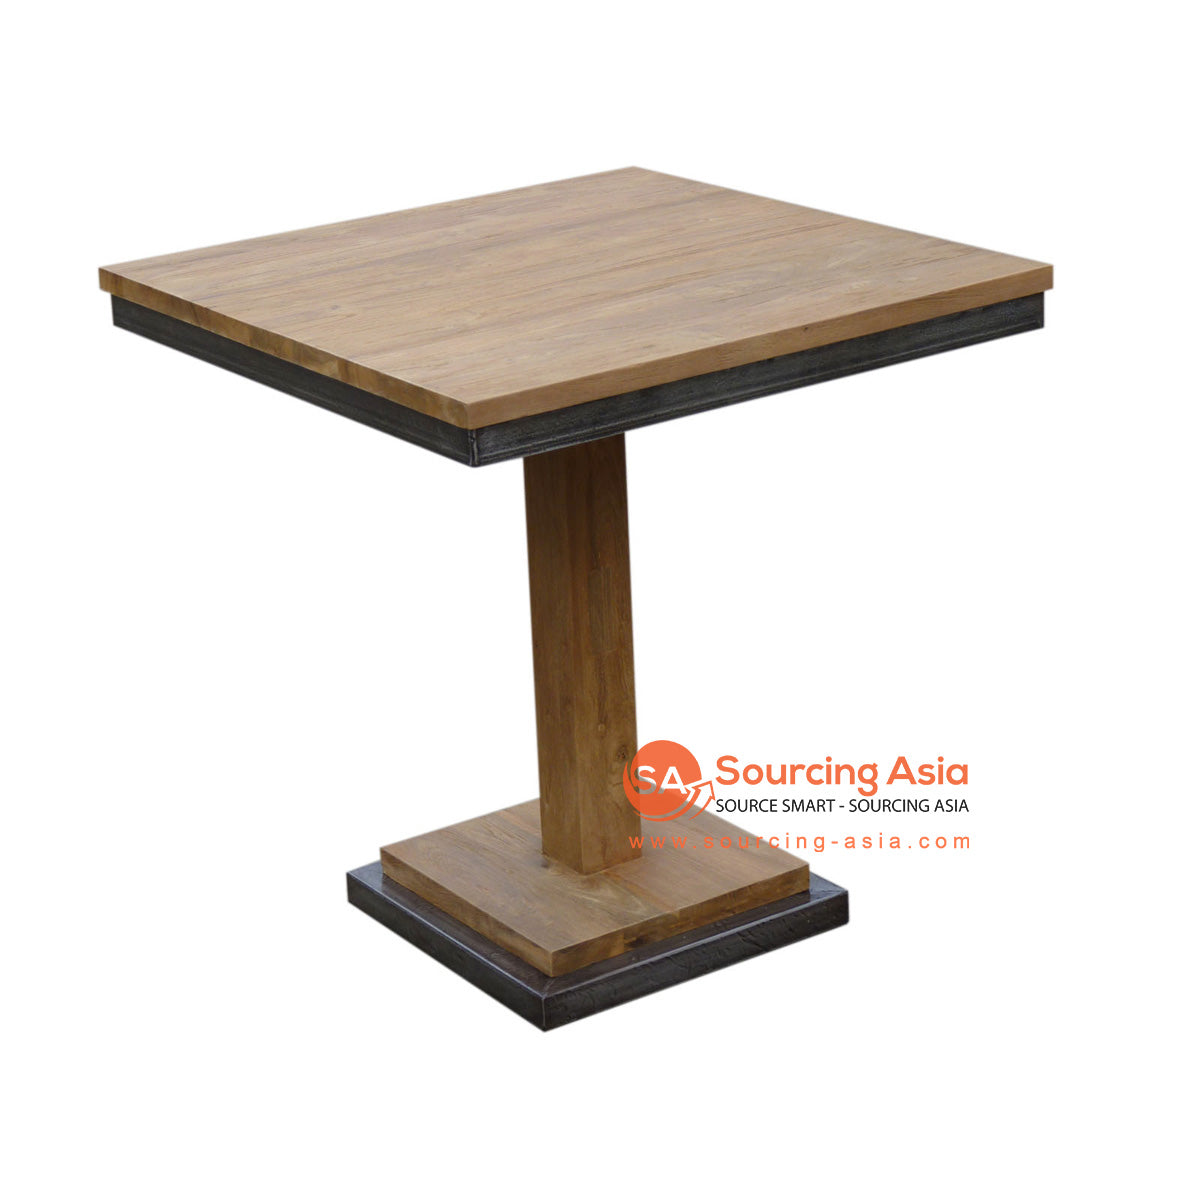 ECL293 NATURAL RECYCLED TEAK WOOD BROOKLYN BISTRO TABLE